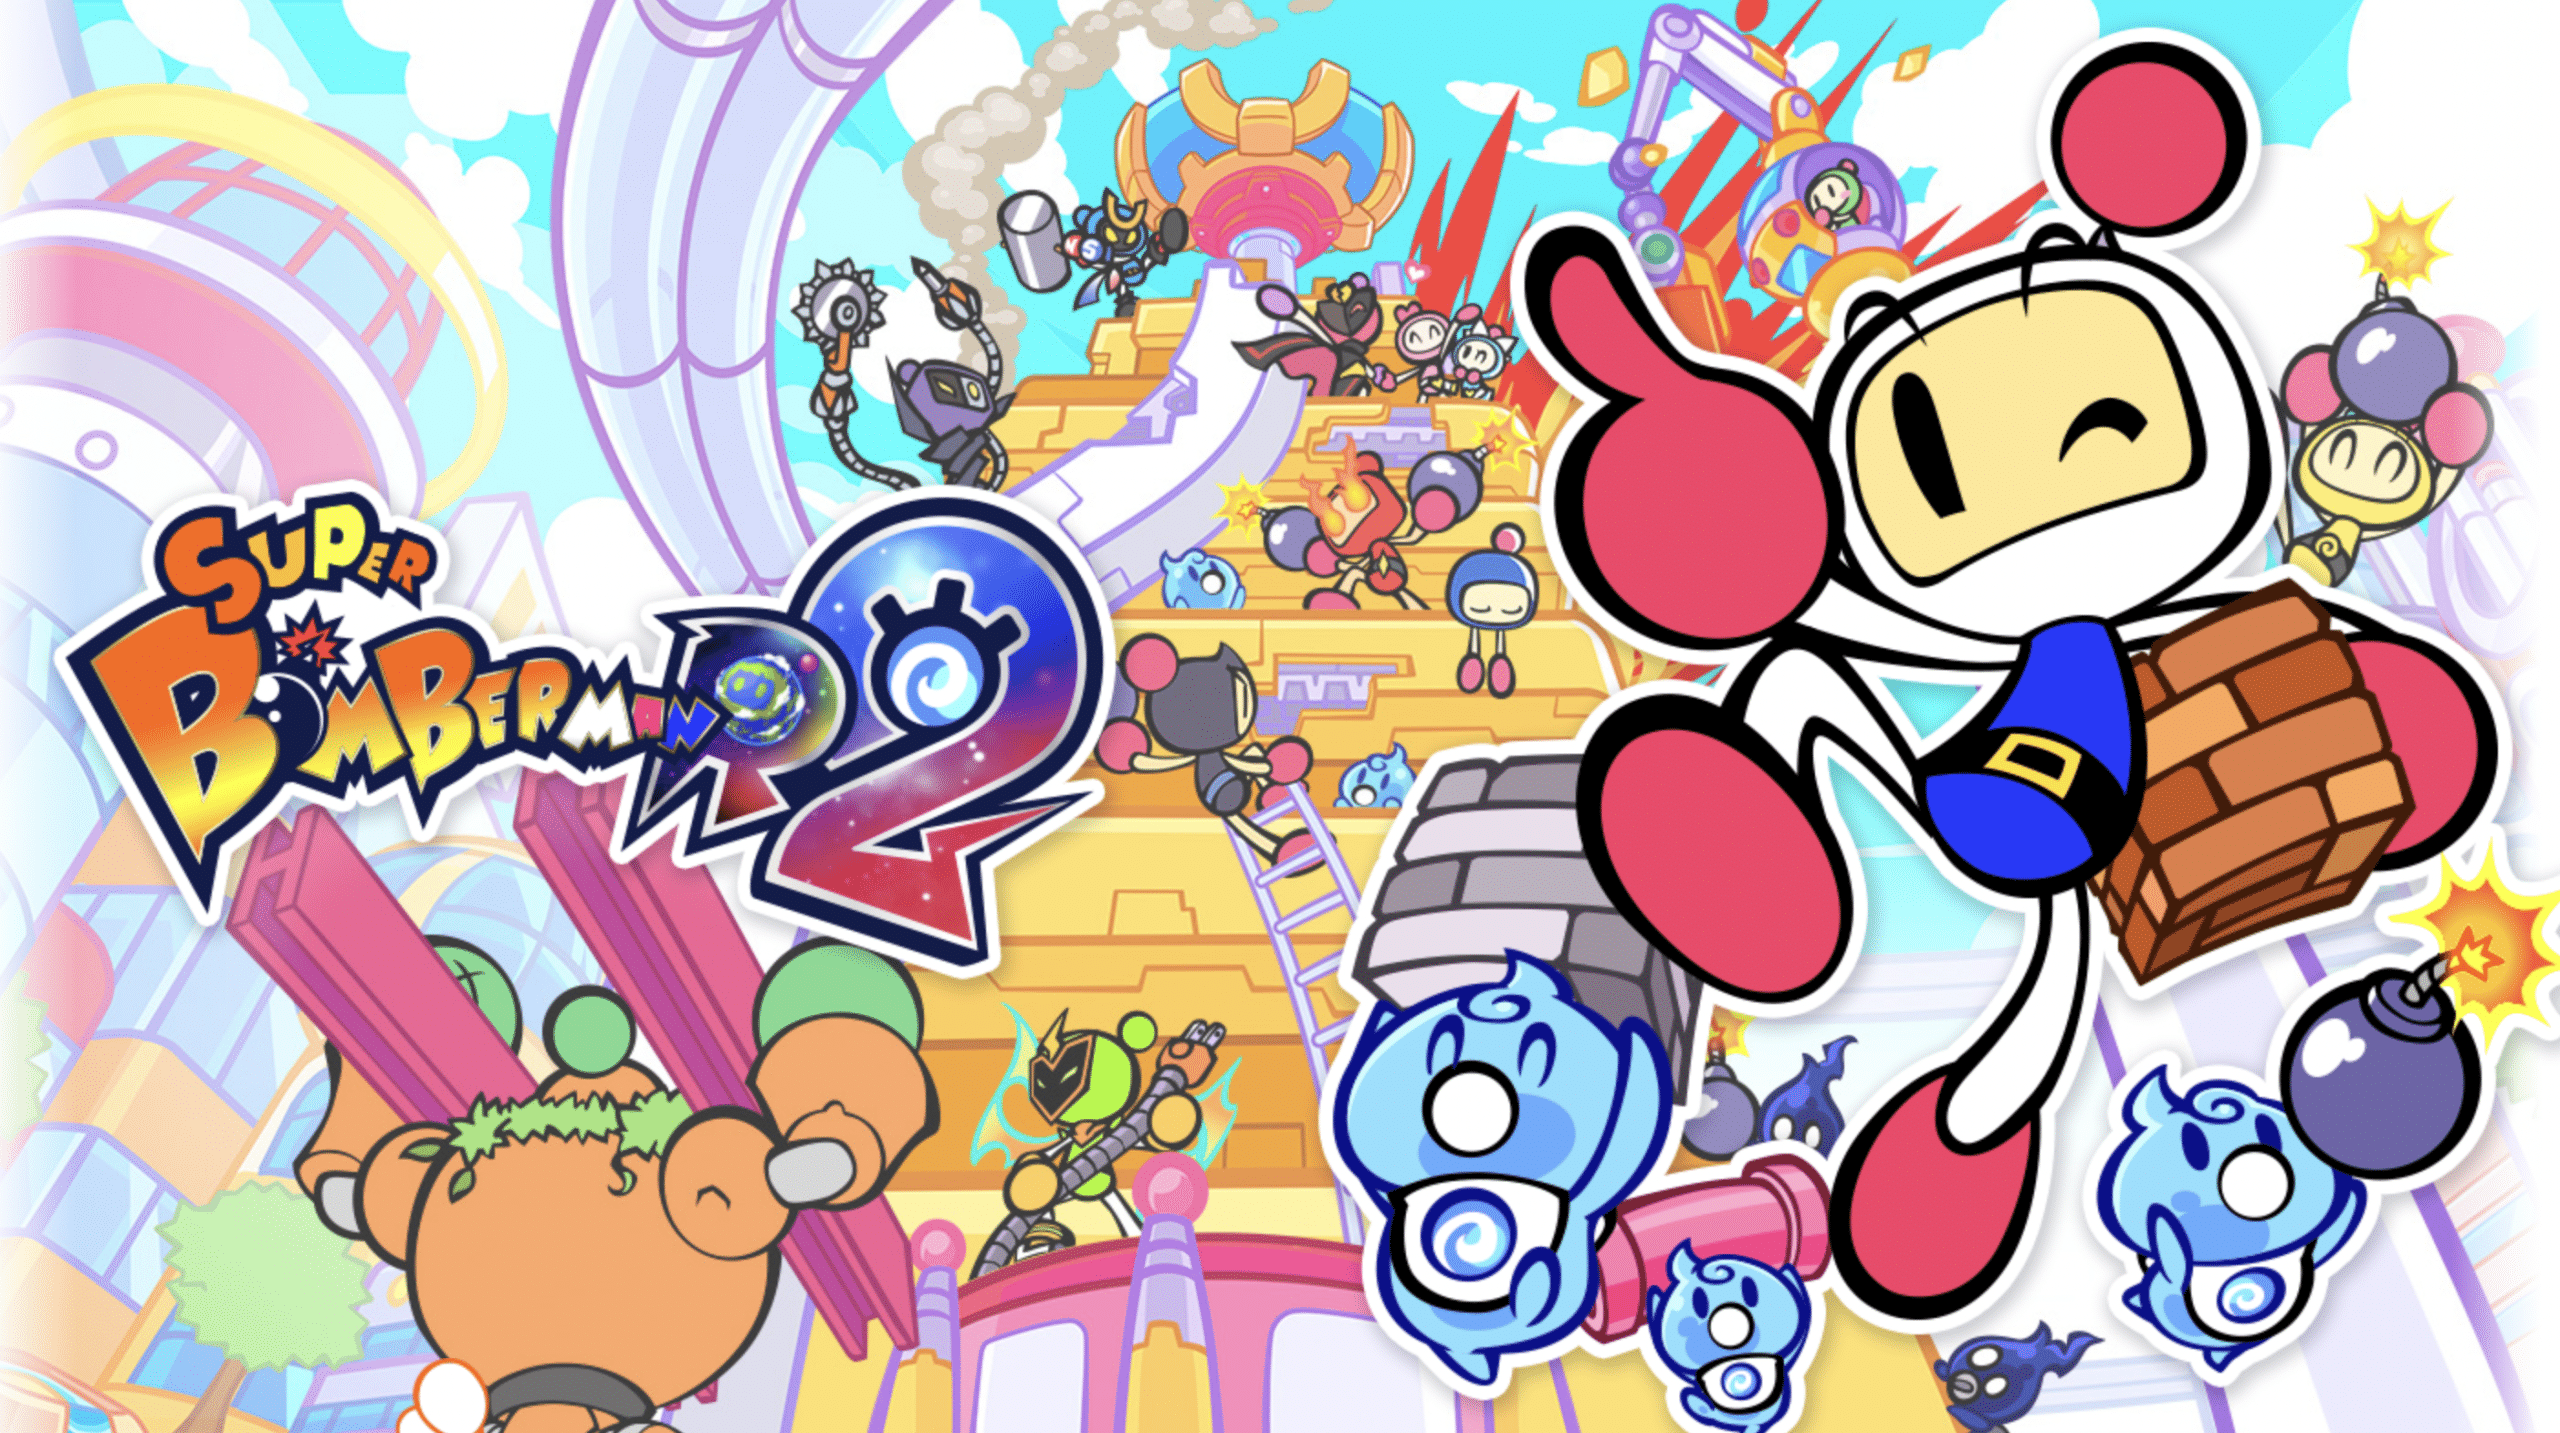 Super Bomberman R 2 Announced for PS4, PS5, Xbox One, Xbox Series, Switch and PC 1